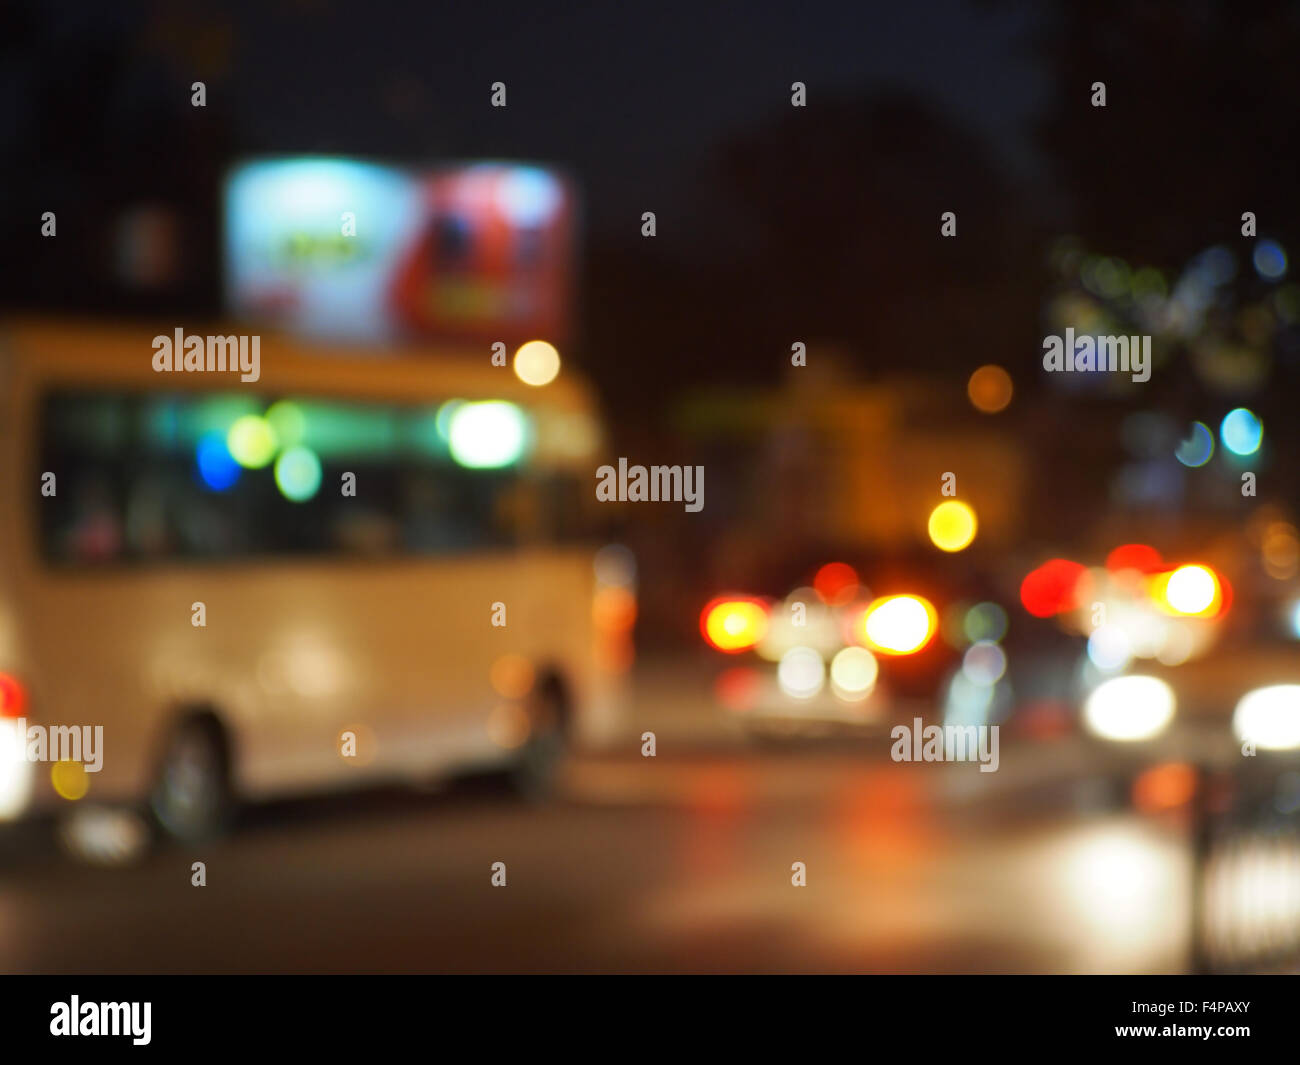 Abstract night scene with bus and headlights. Blur and defocused lights from the headlights of cars and traffic lights can be us Stock Photo